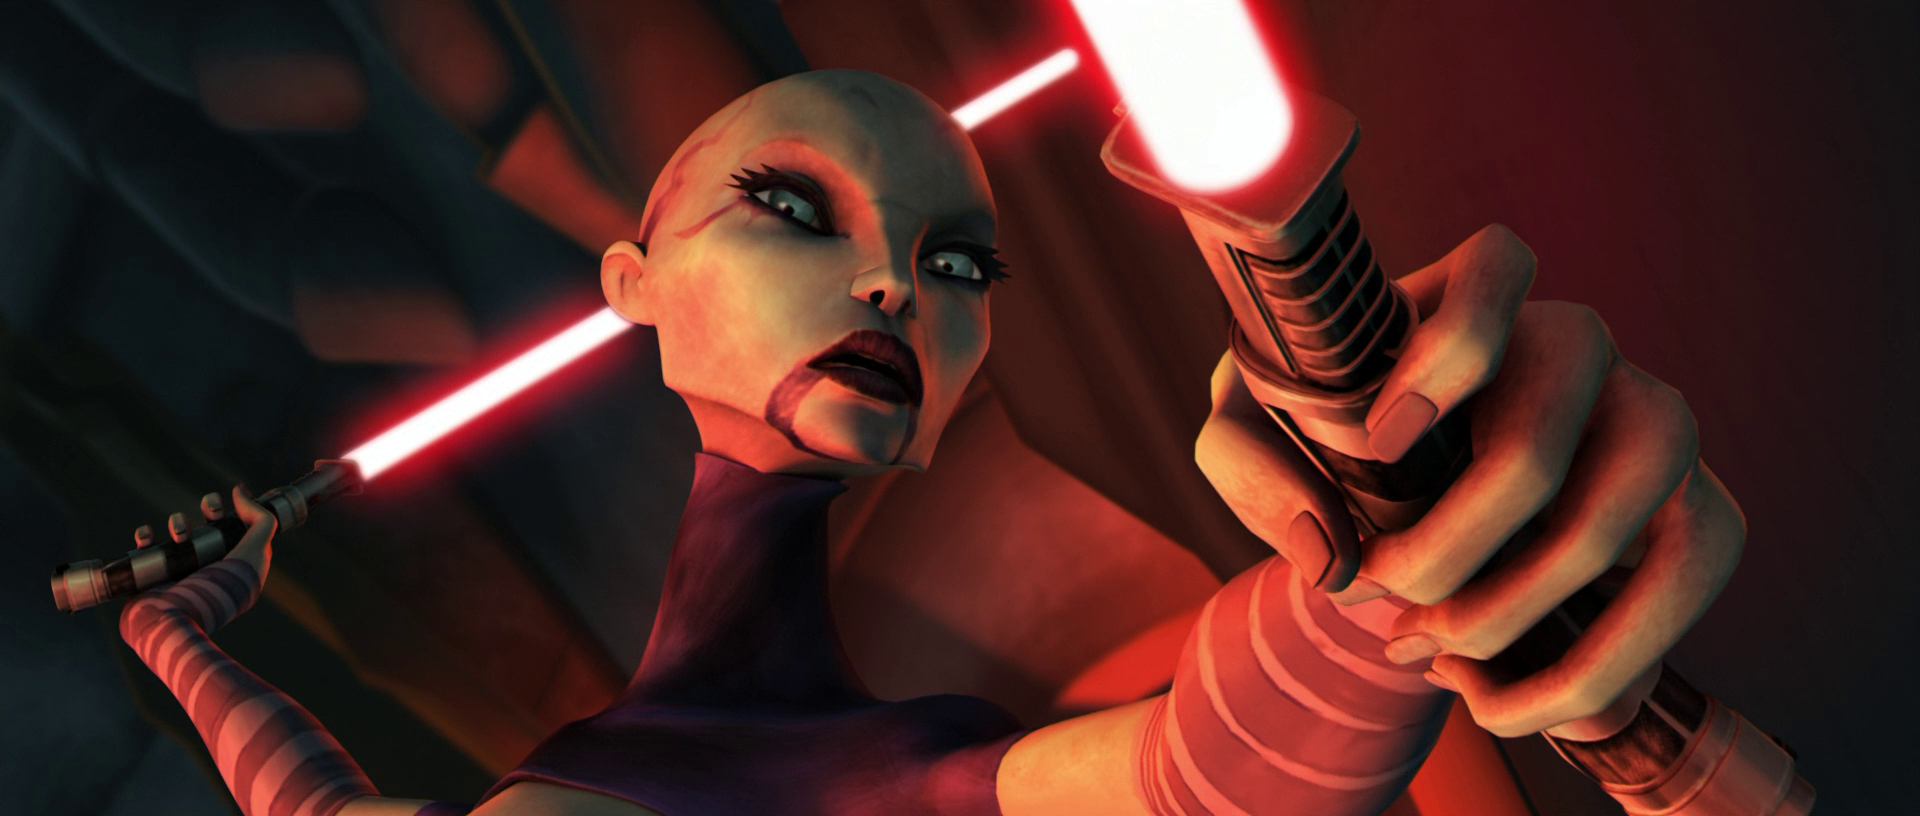 Ventress_Tranquility